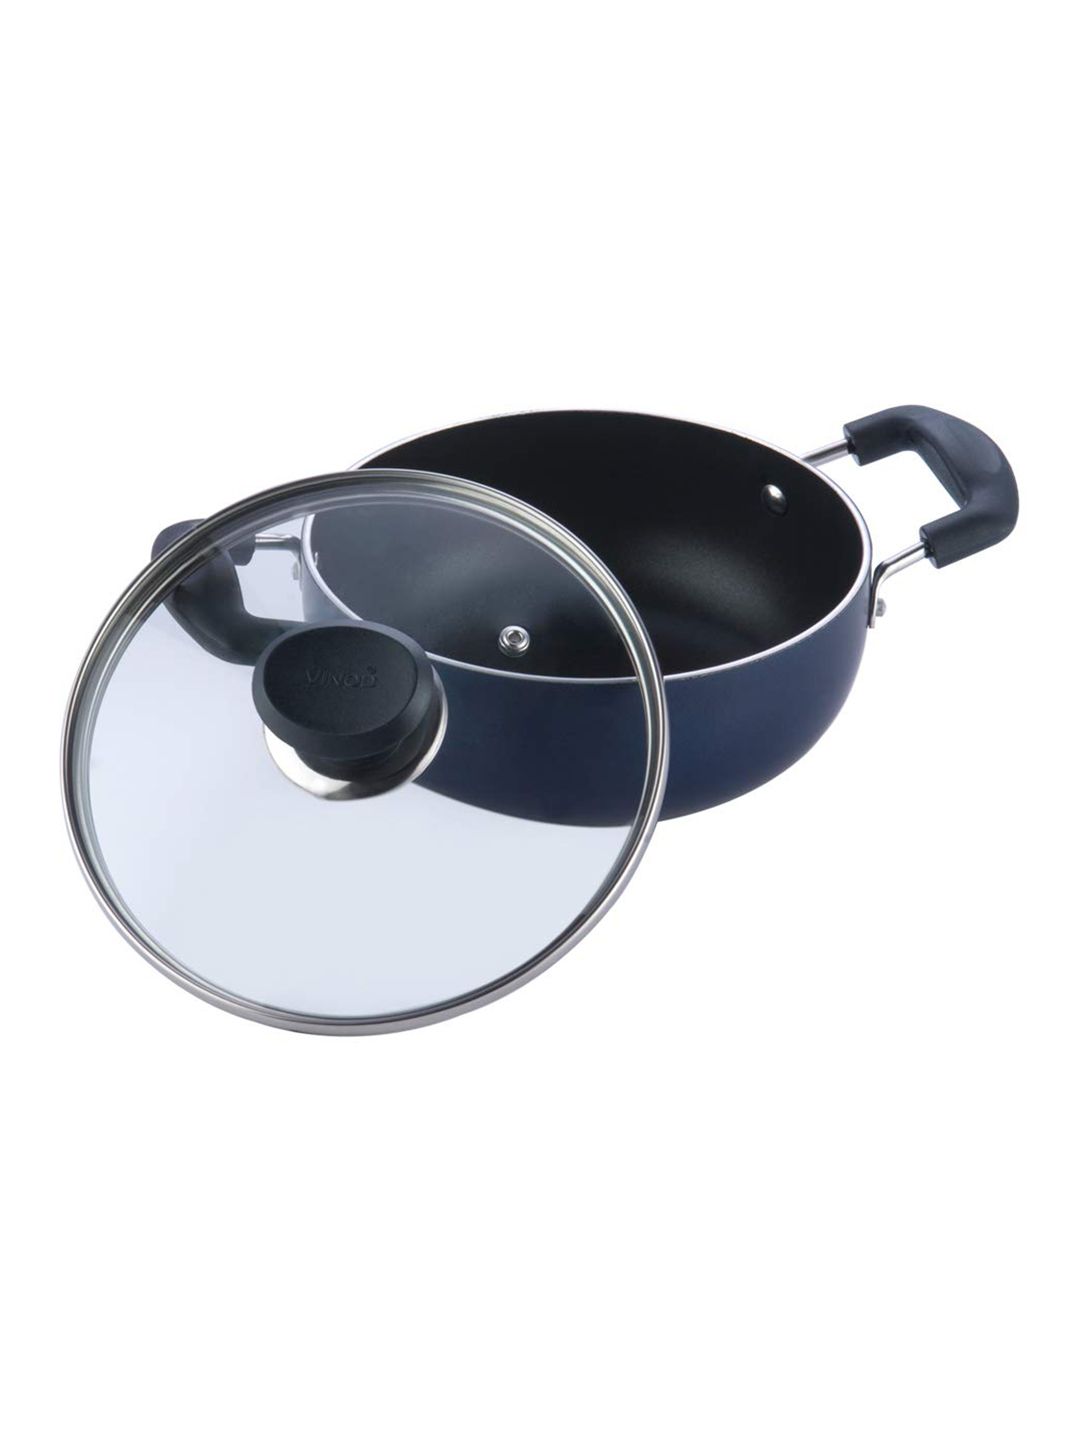 Vinod Black Solid Non-Stick Deep Kadai With Glass Lid 2 Ltr Price in India